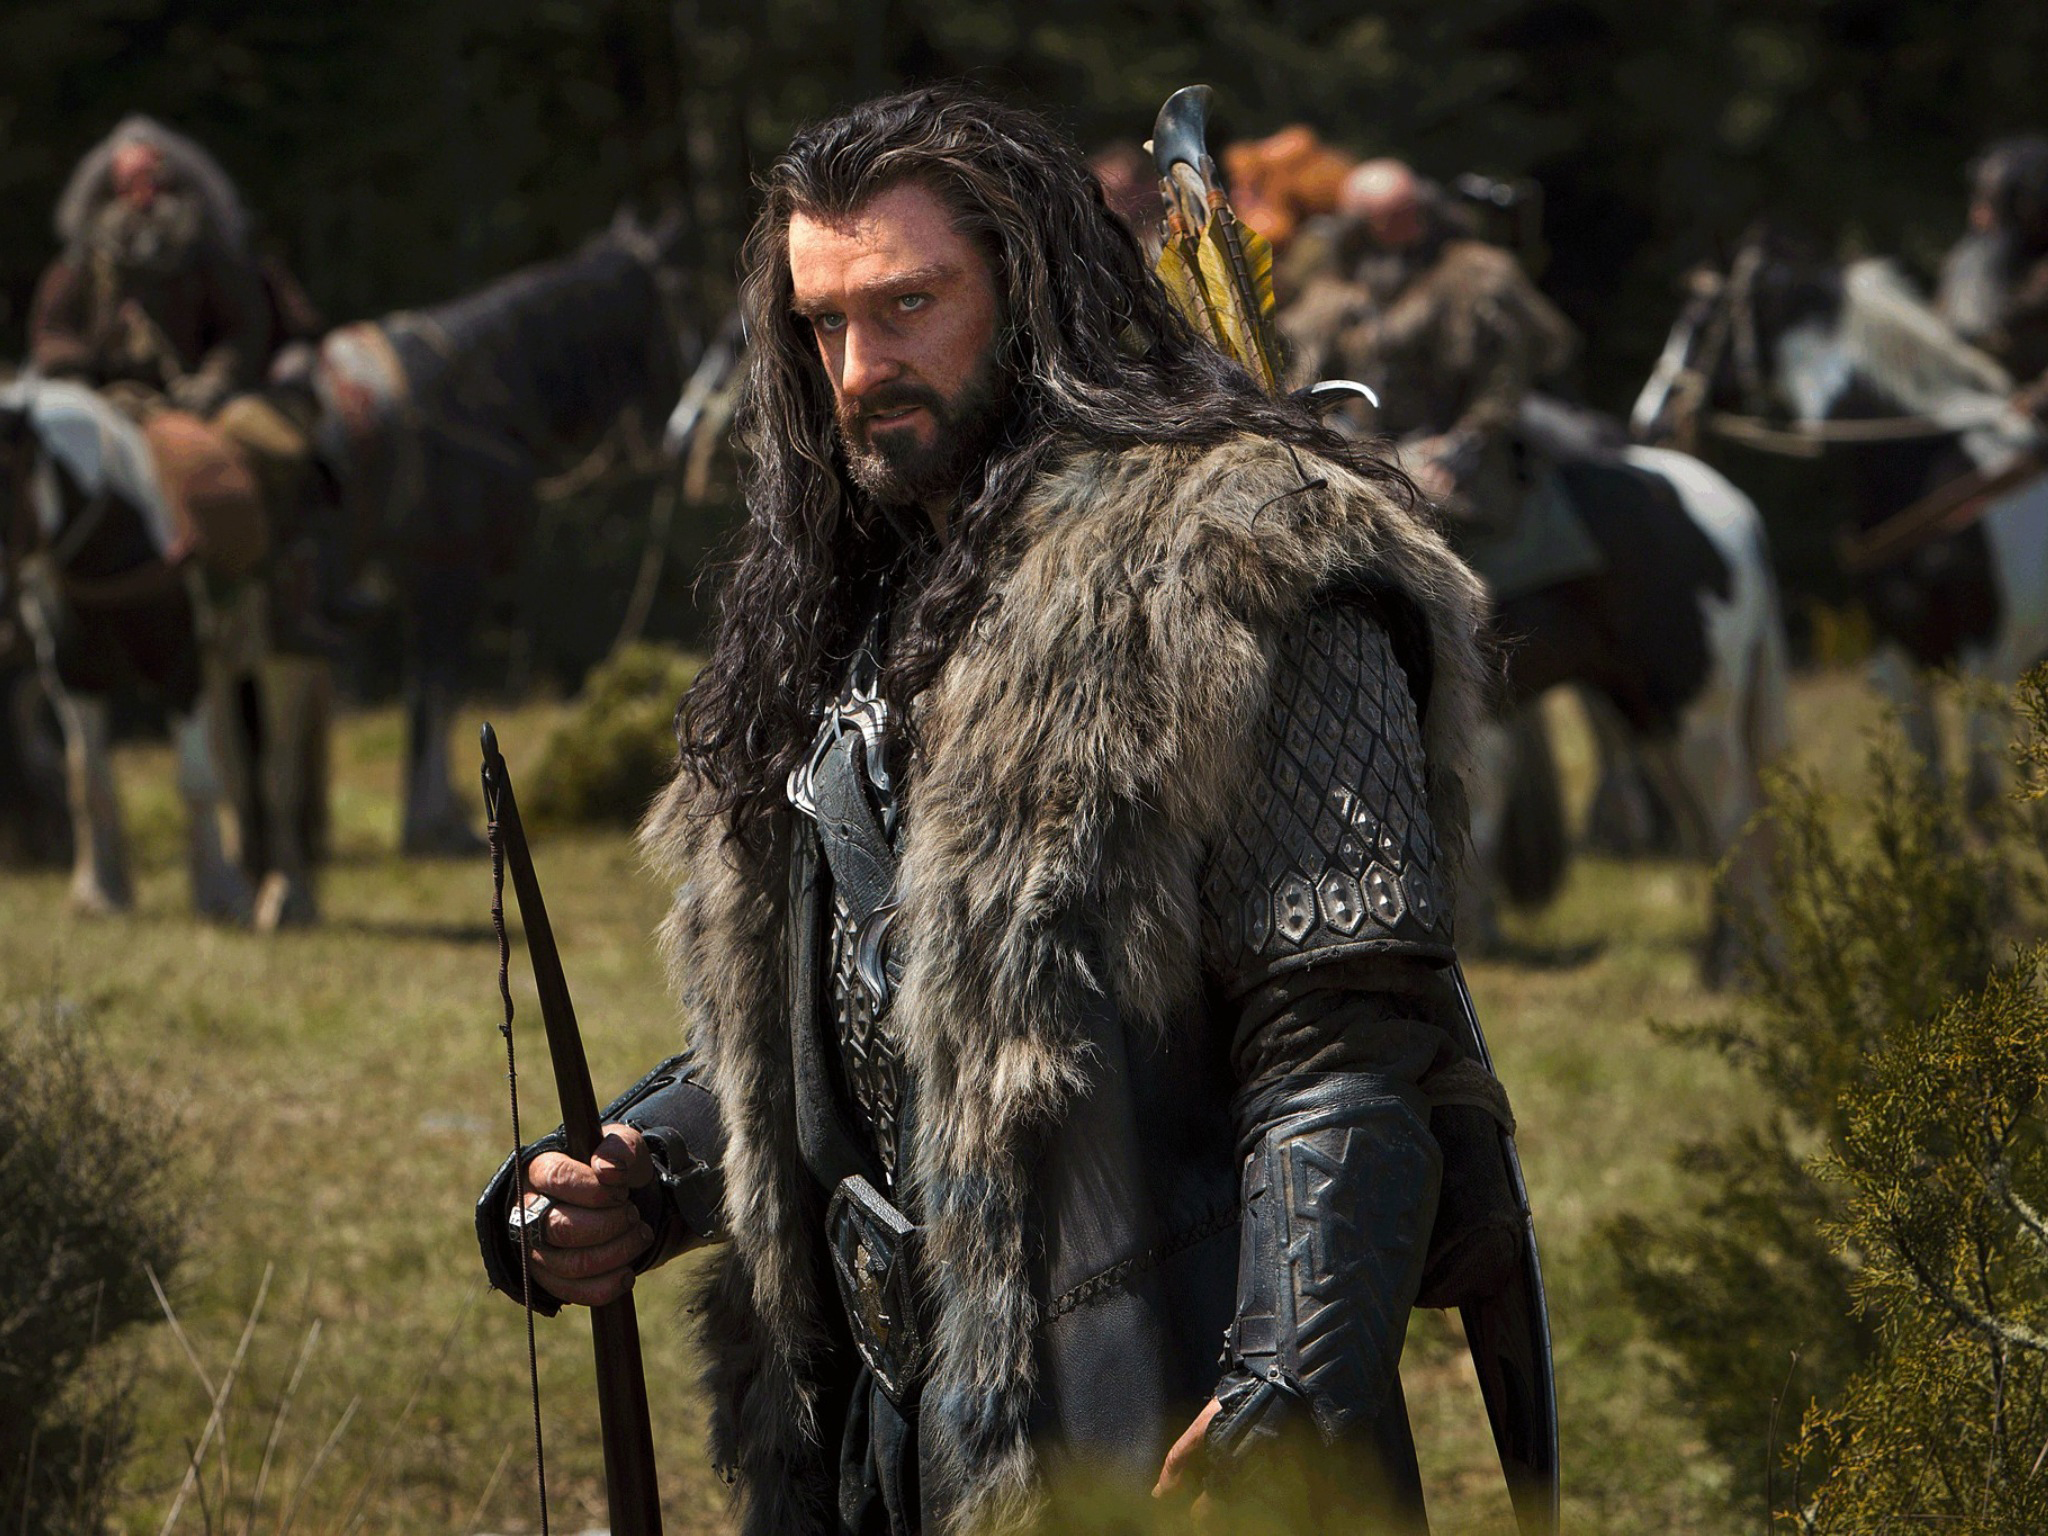 5 New Thorin Oakenshield Images in High Res Heirs of Durin